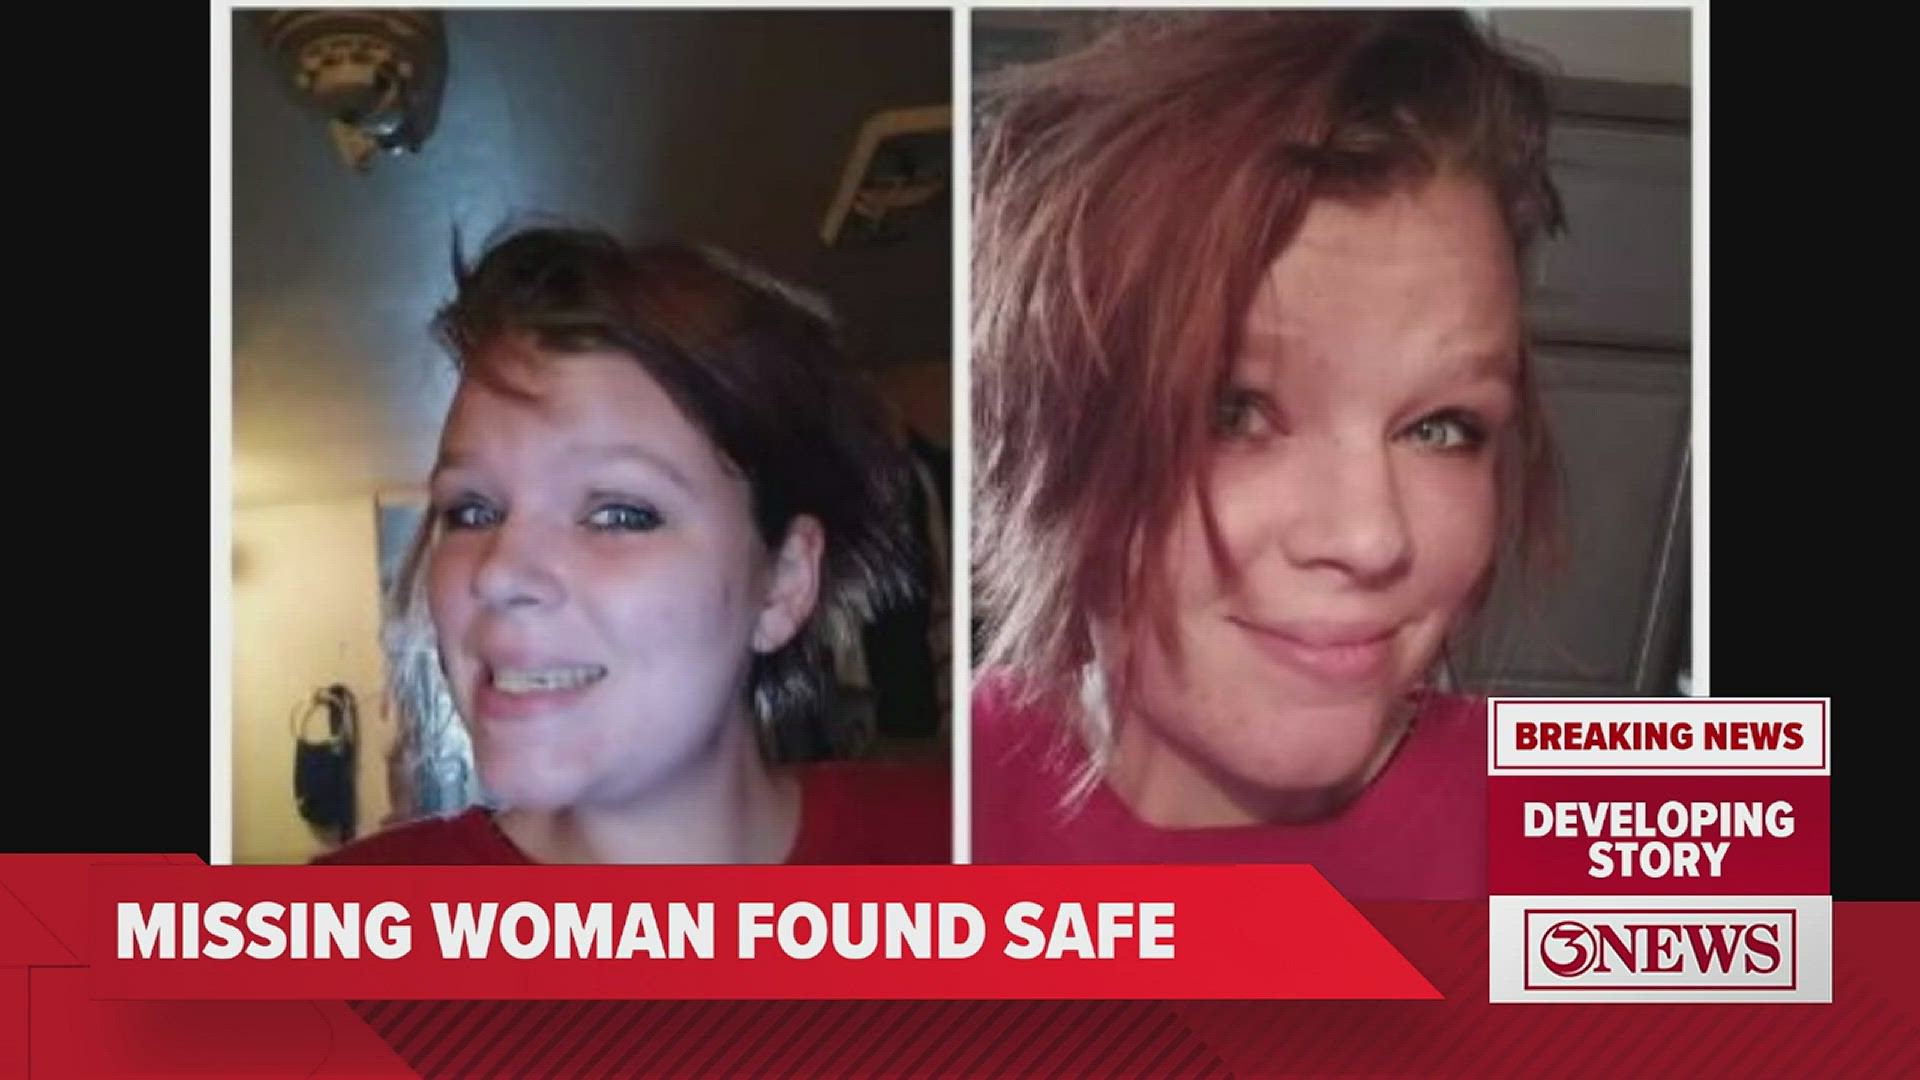 Police officials said Tackett was found around 3 p.m. Wednesday. She had been missing since February 22.